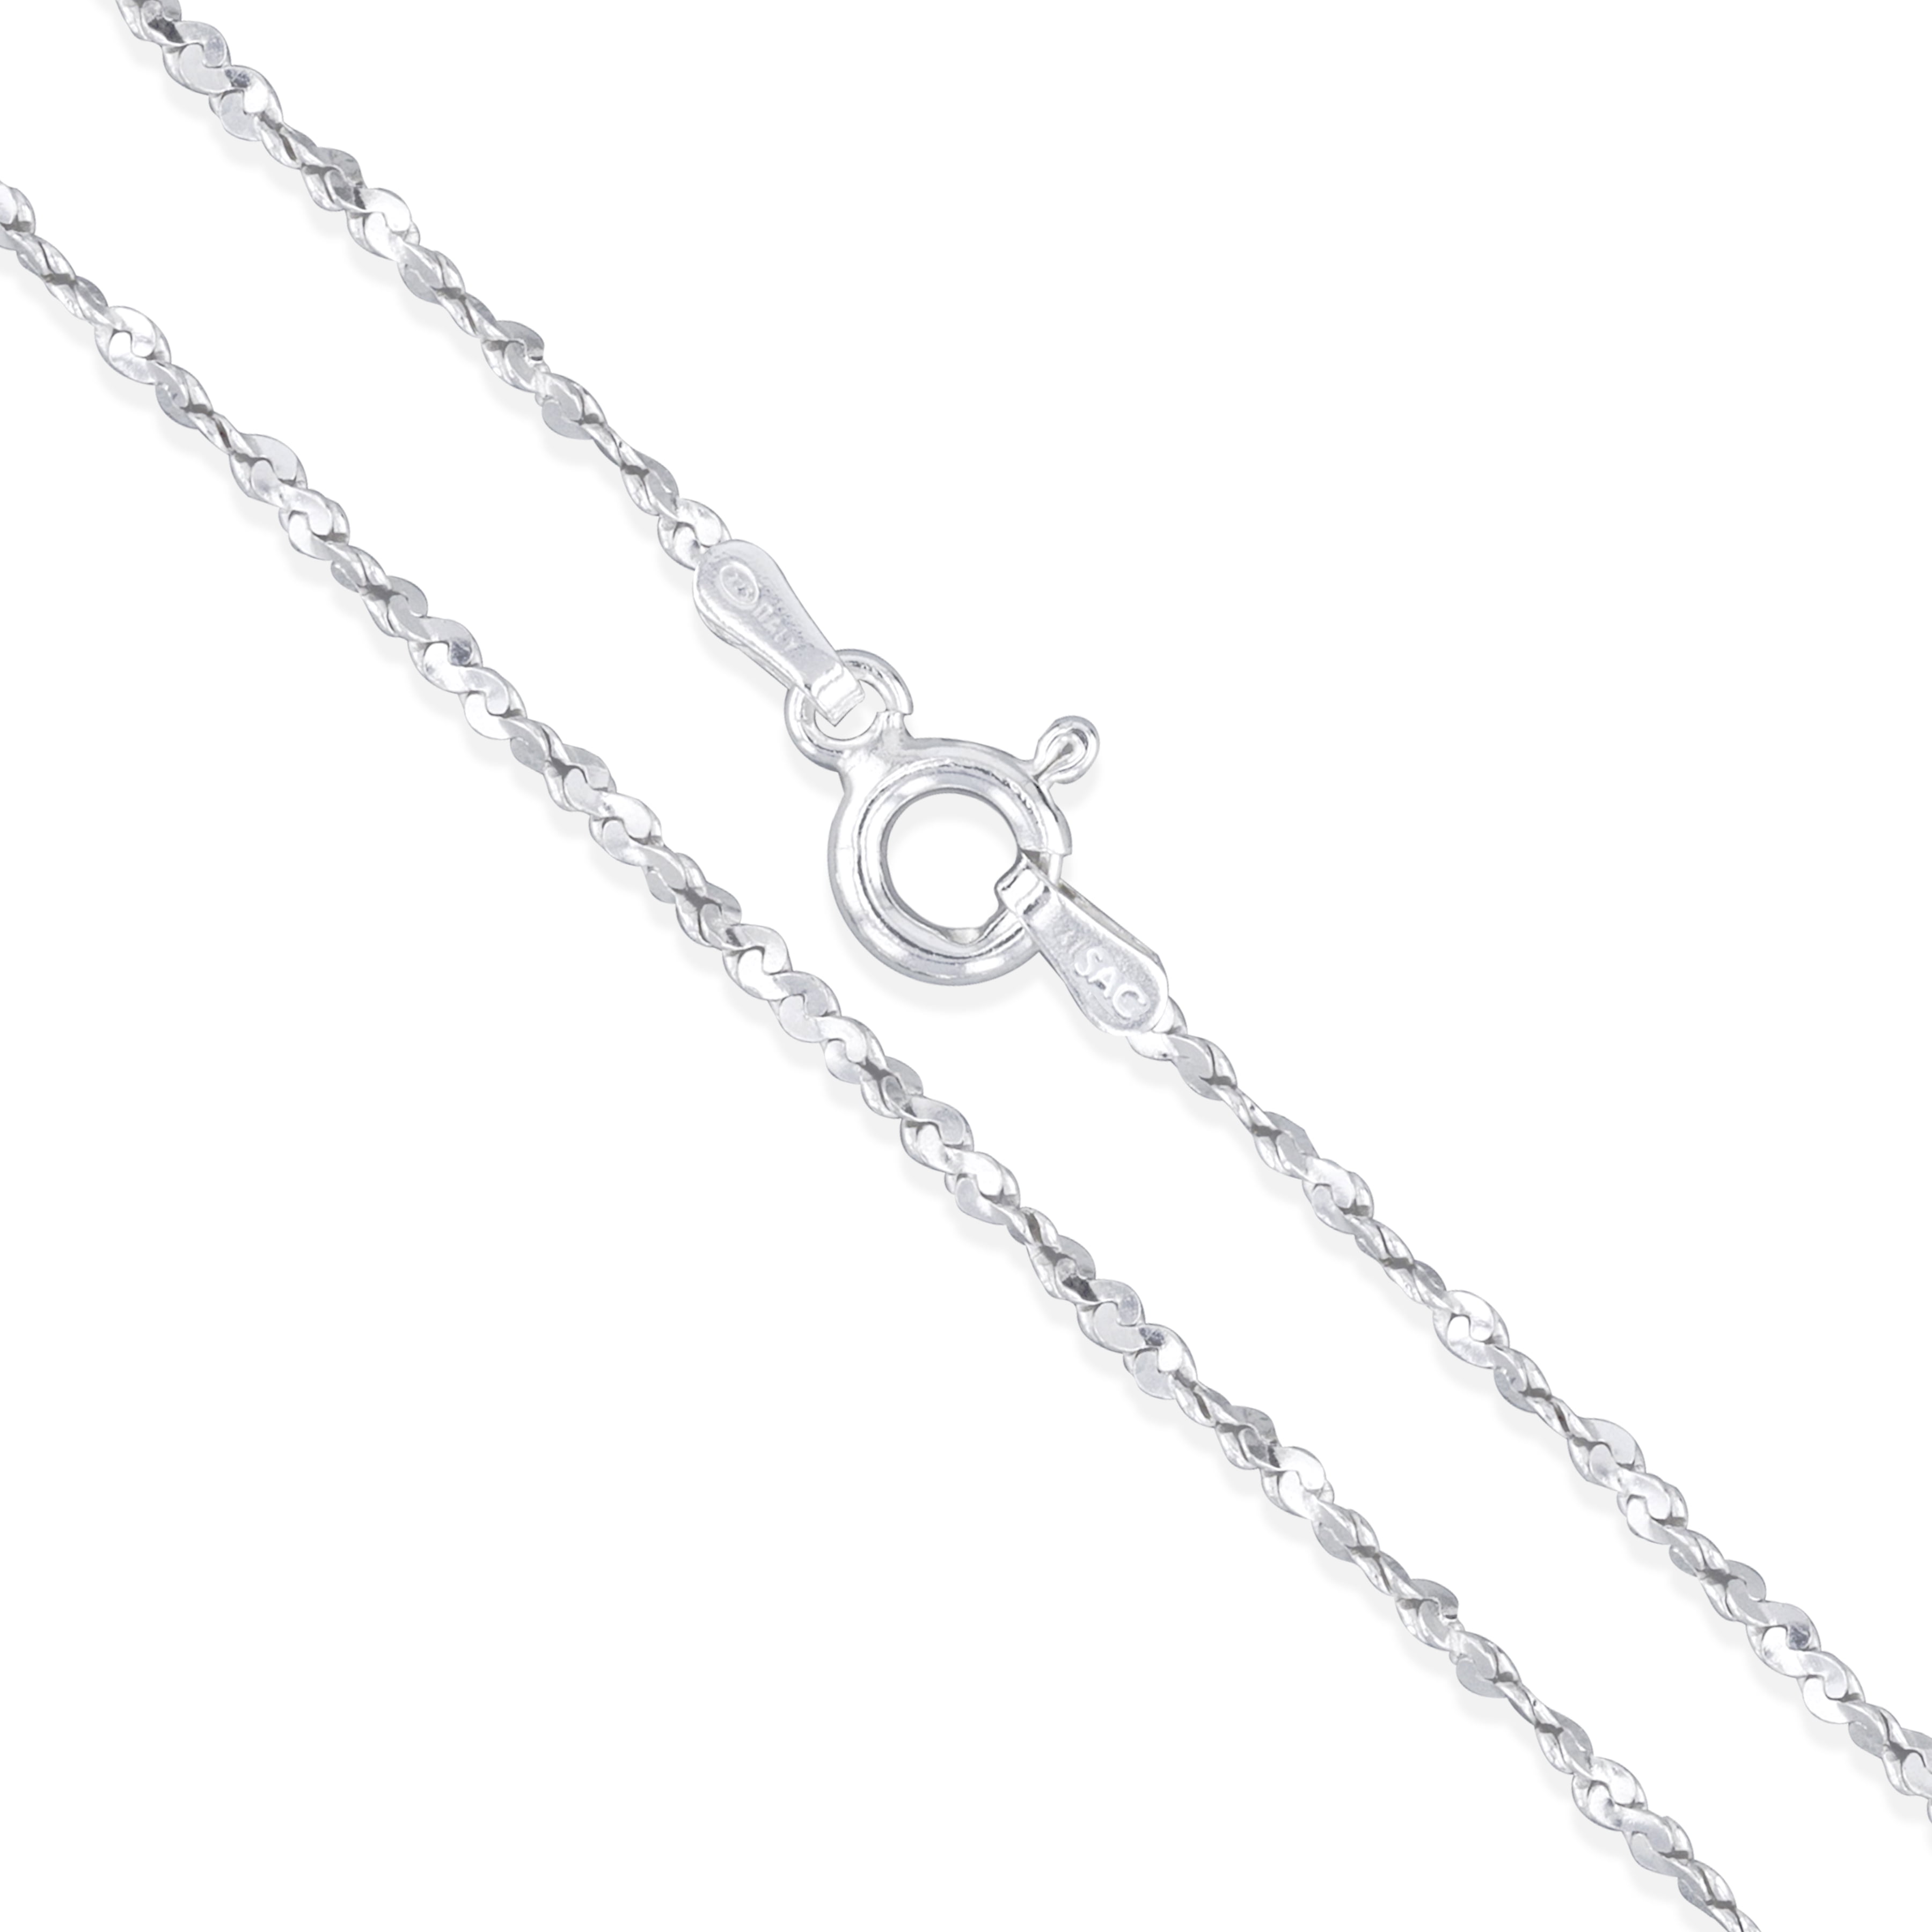 Men & Women's Unisex 925 Sterling Silver 22inch 1.2mm Round Snake Chain  Necklace